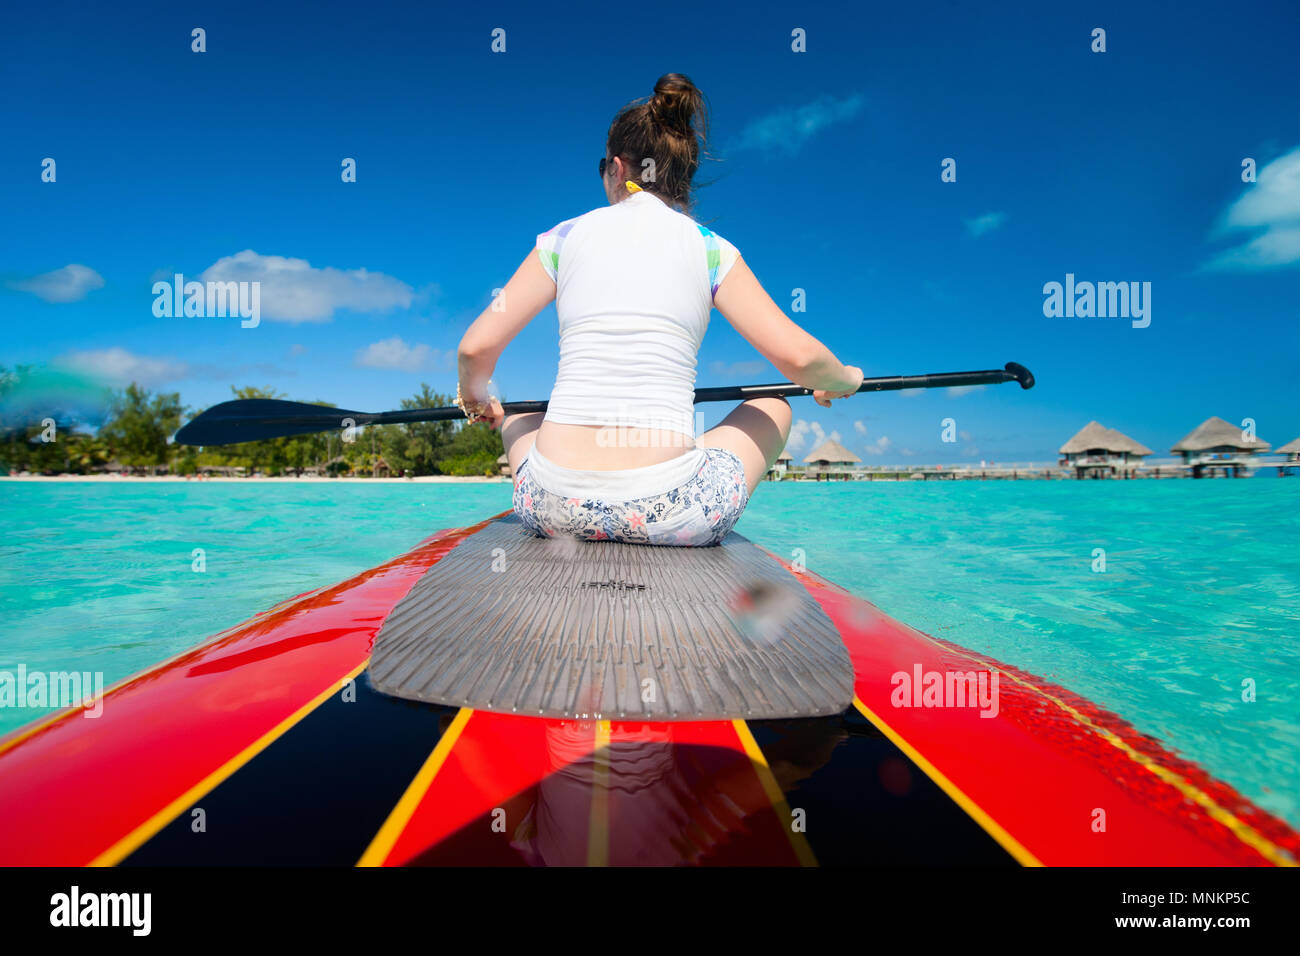 Back view of young sporty woman on paddle board Stock Photo